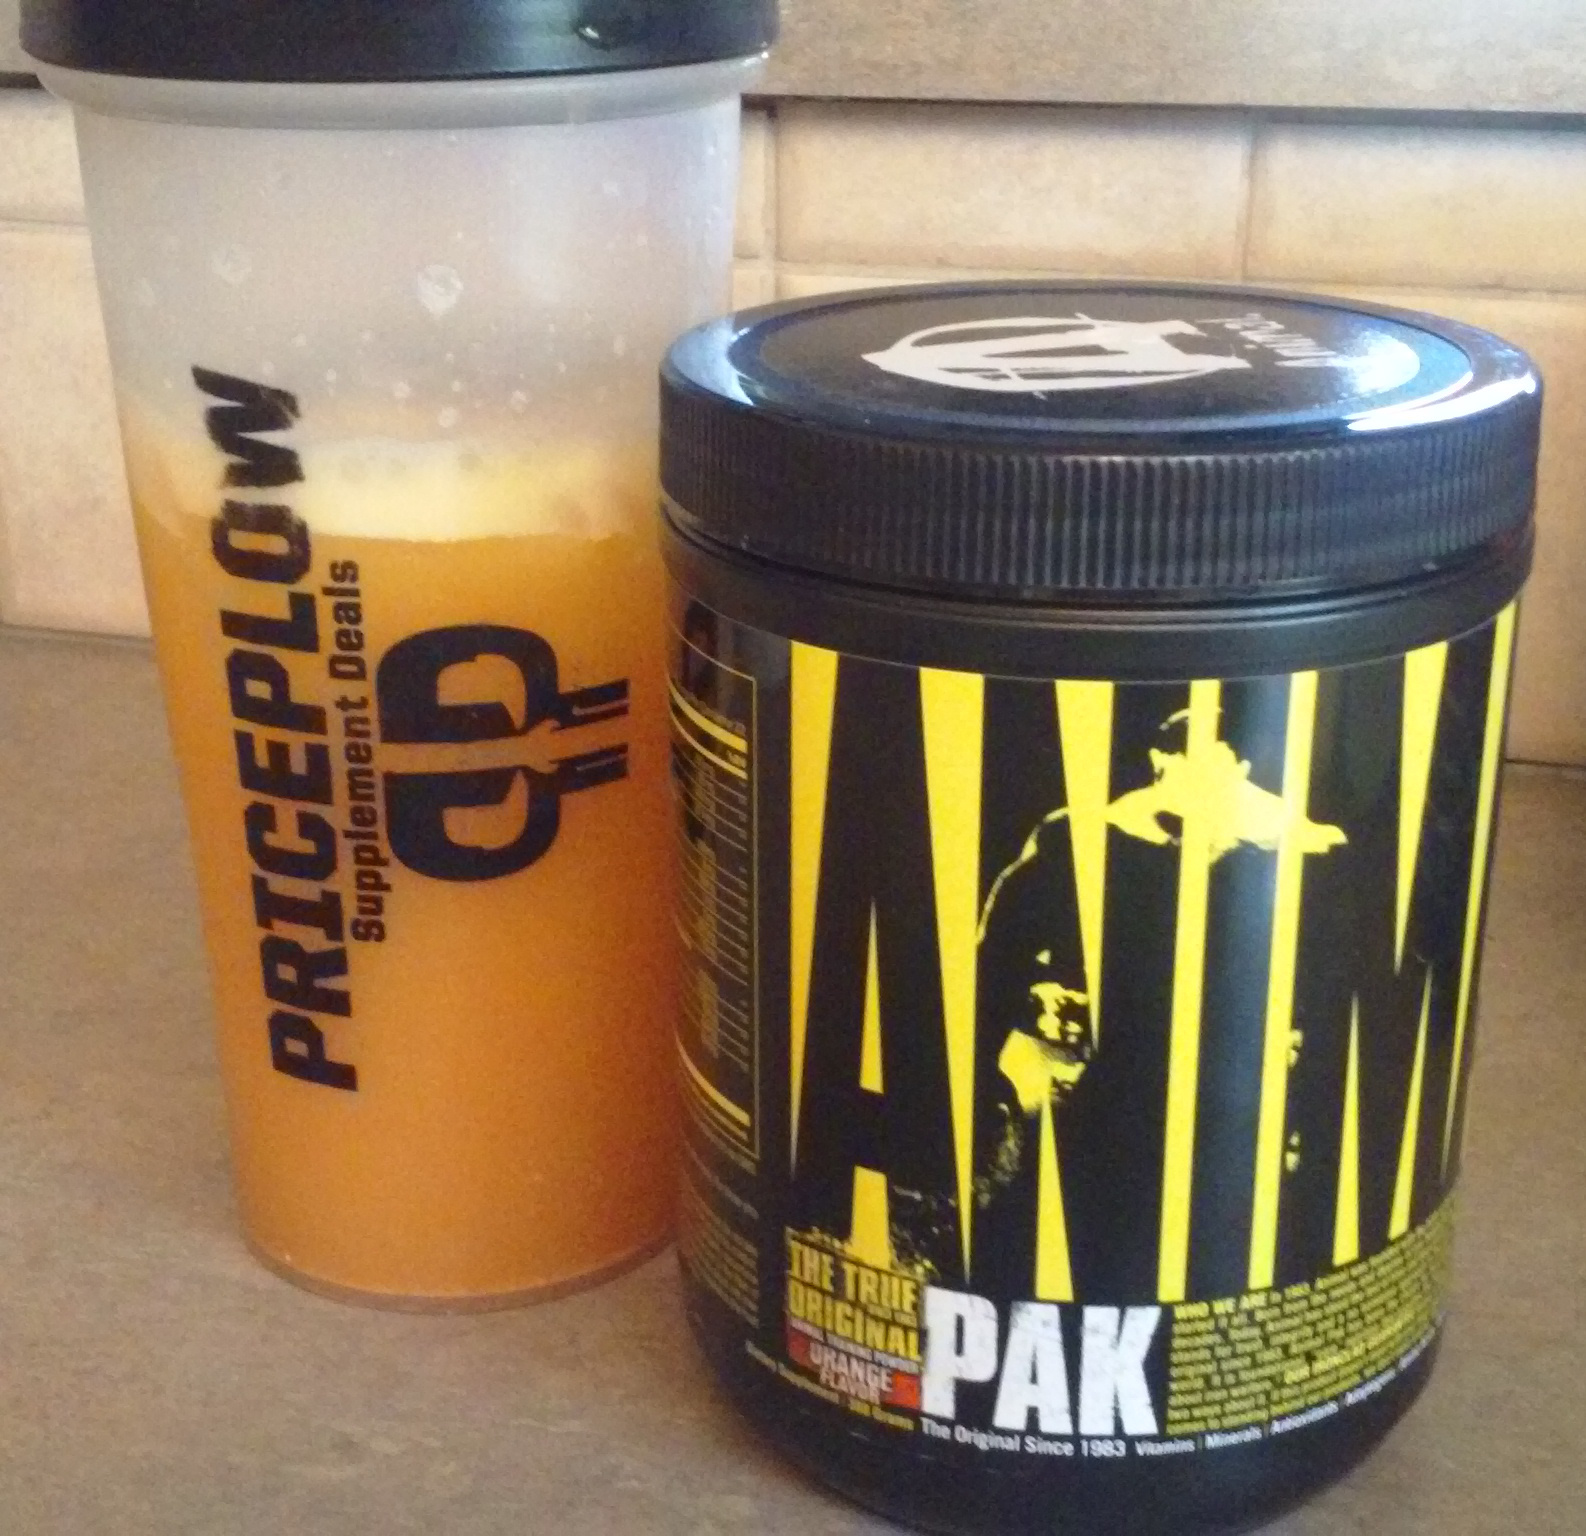 Animal Pak POWDER: The Solution to “Pill” Problems